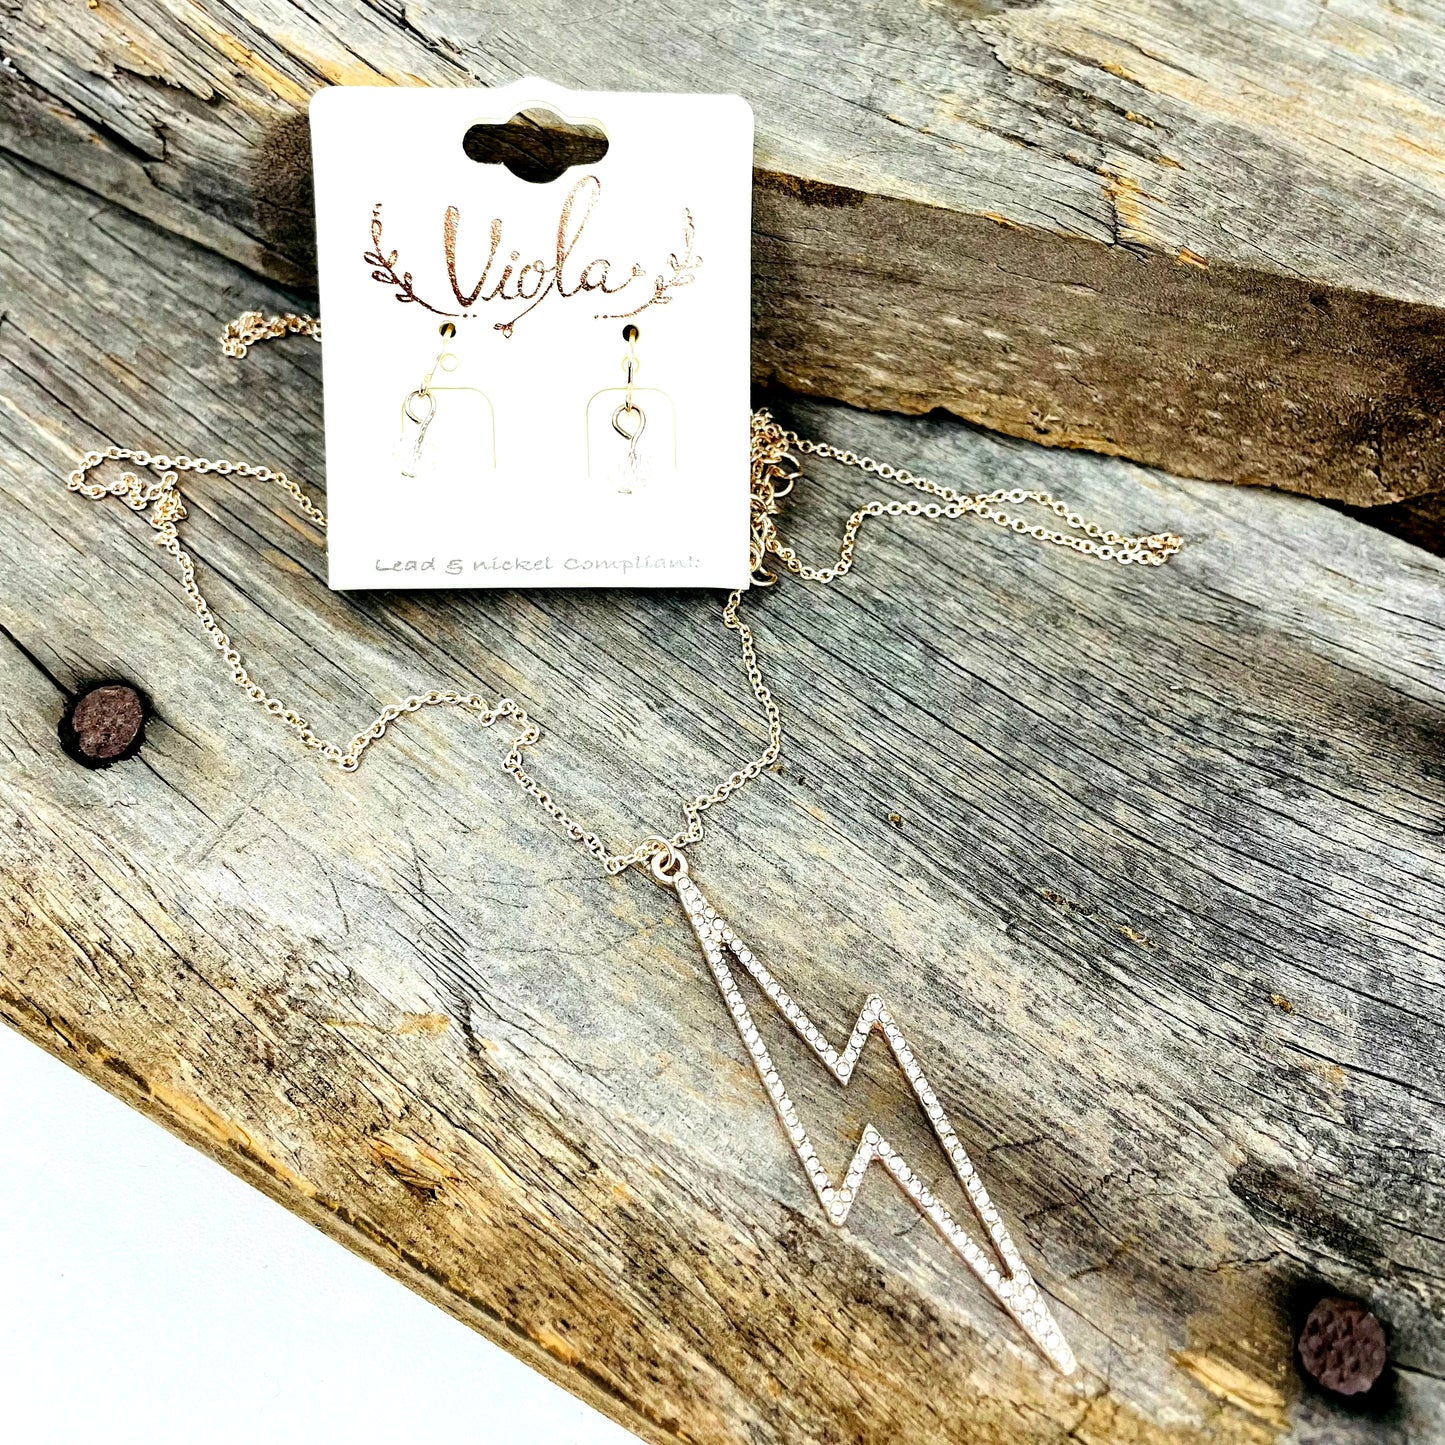 Gold Lightening Bolt Earrings and Necklace on piece of barnwood